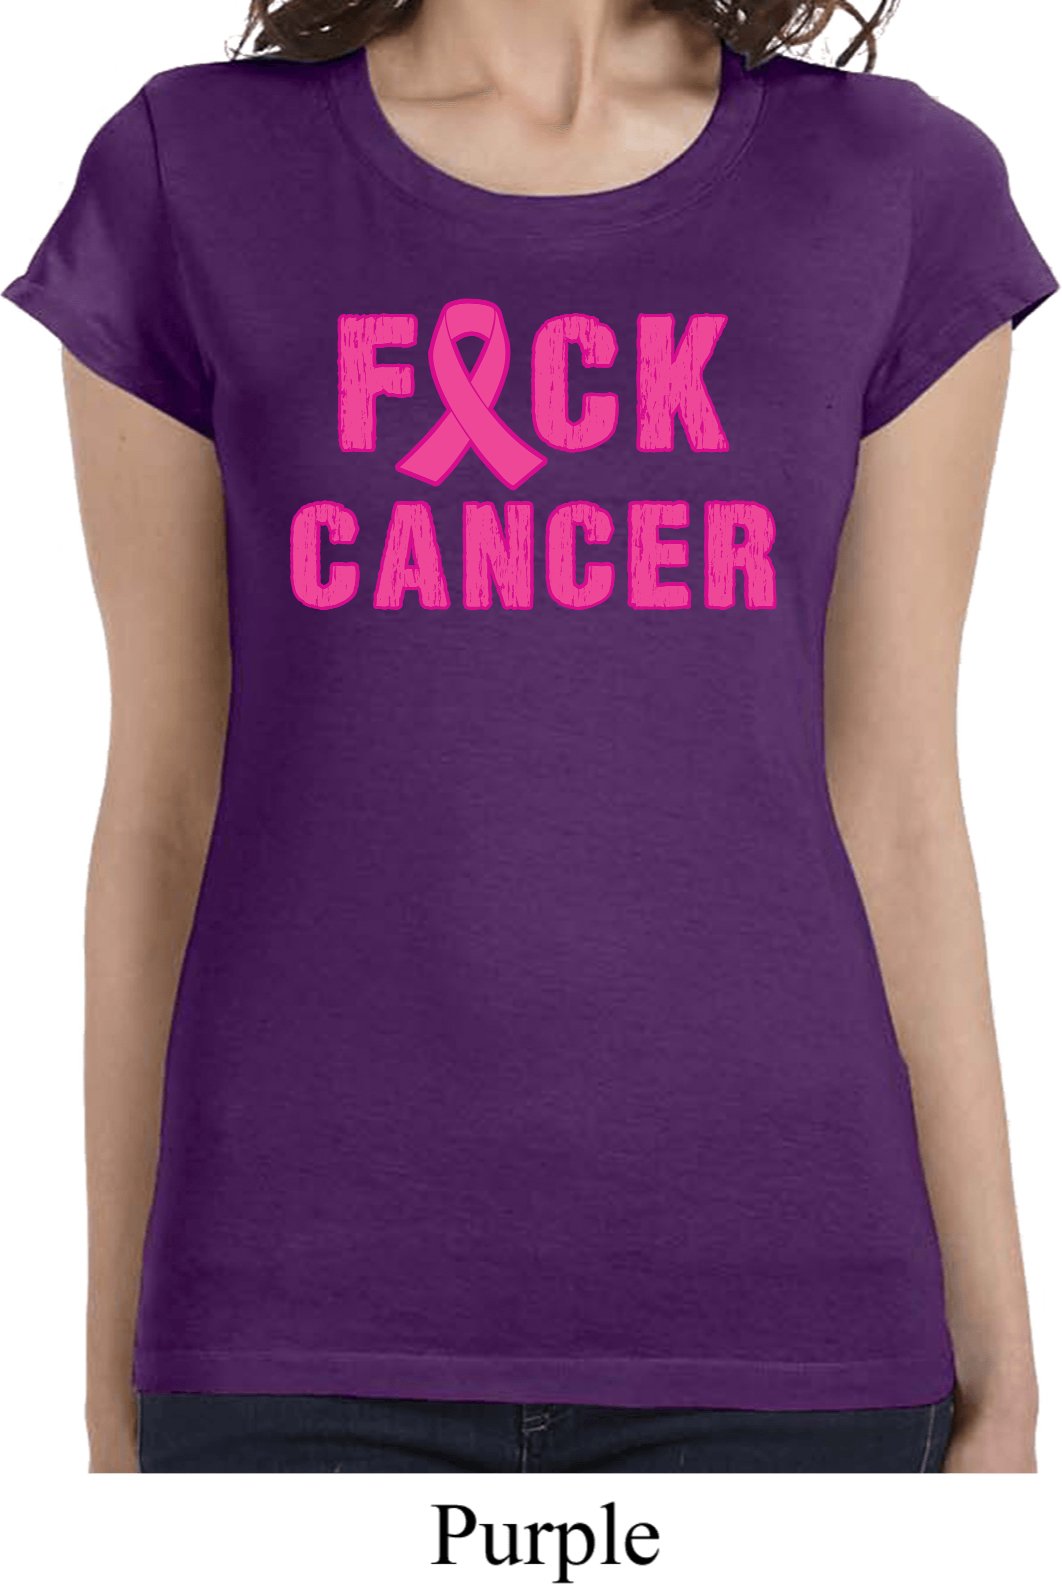 Ladies Breast Cancer Shirt F*CK Cancer Longer Length Tee T ...